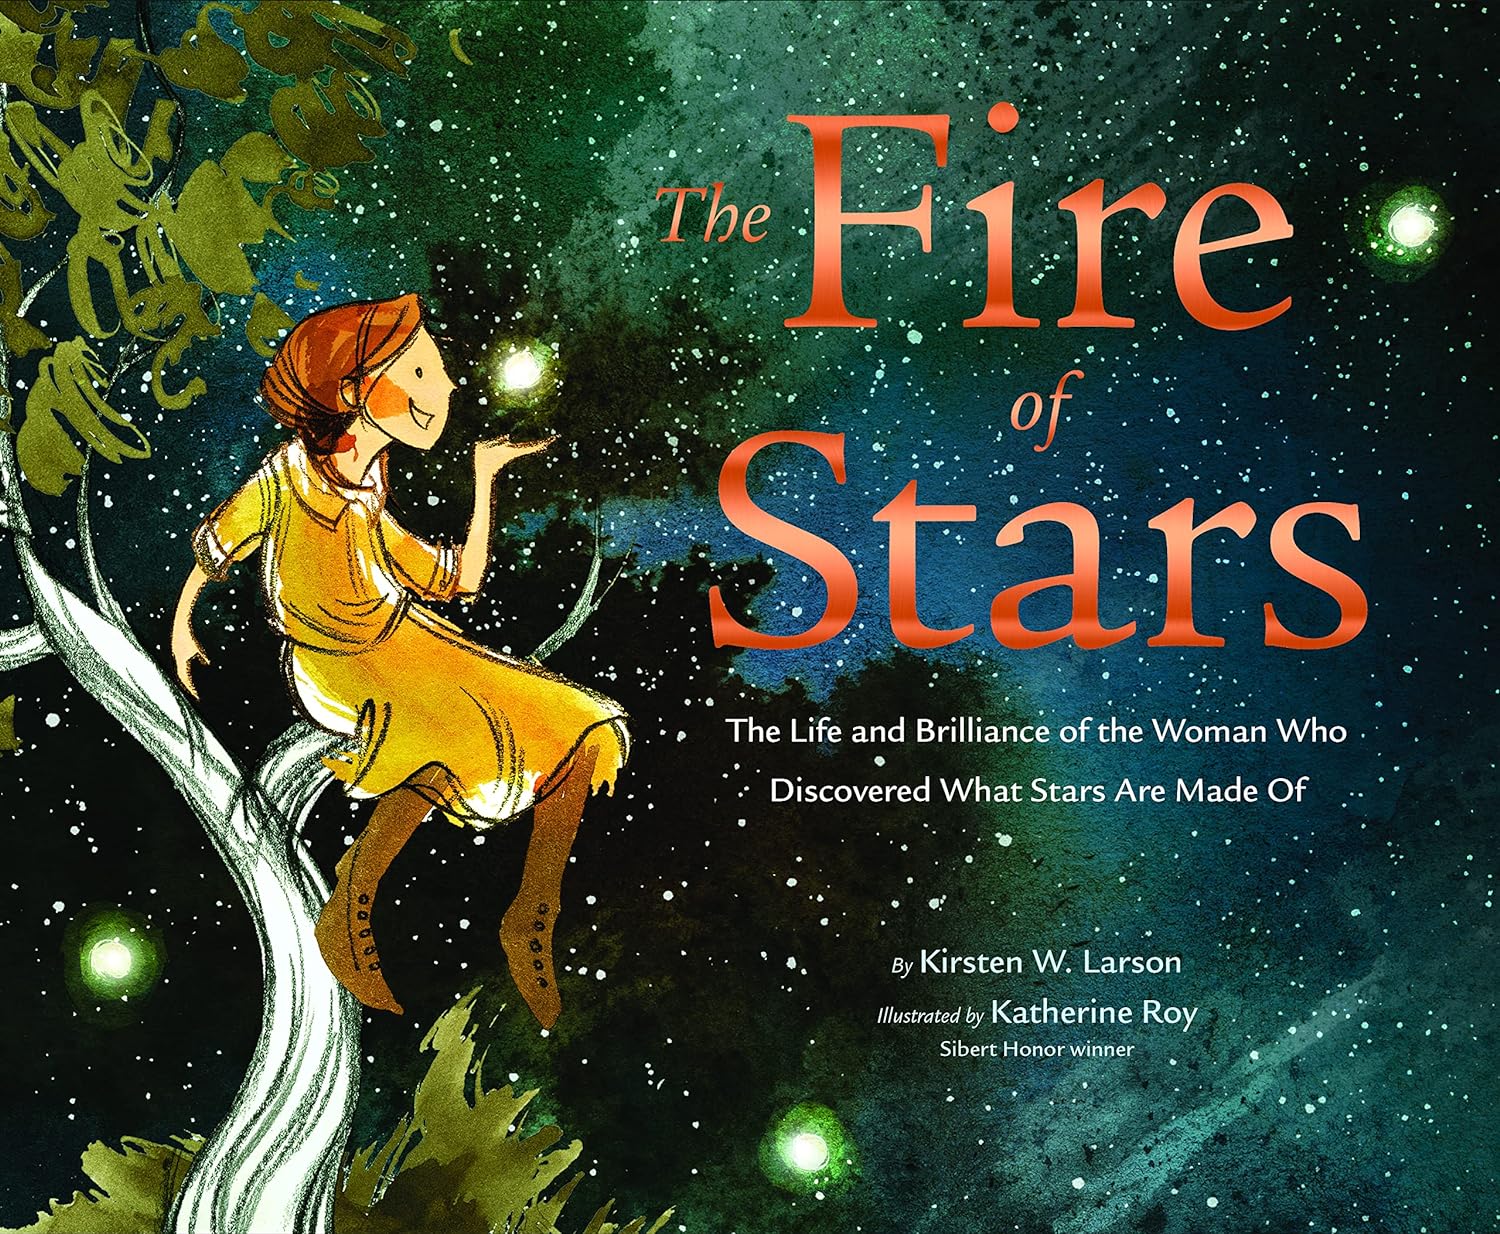 Book cover: "The Fire of Stars" woman sitting on a tree branch with stars behind her